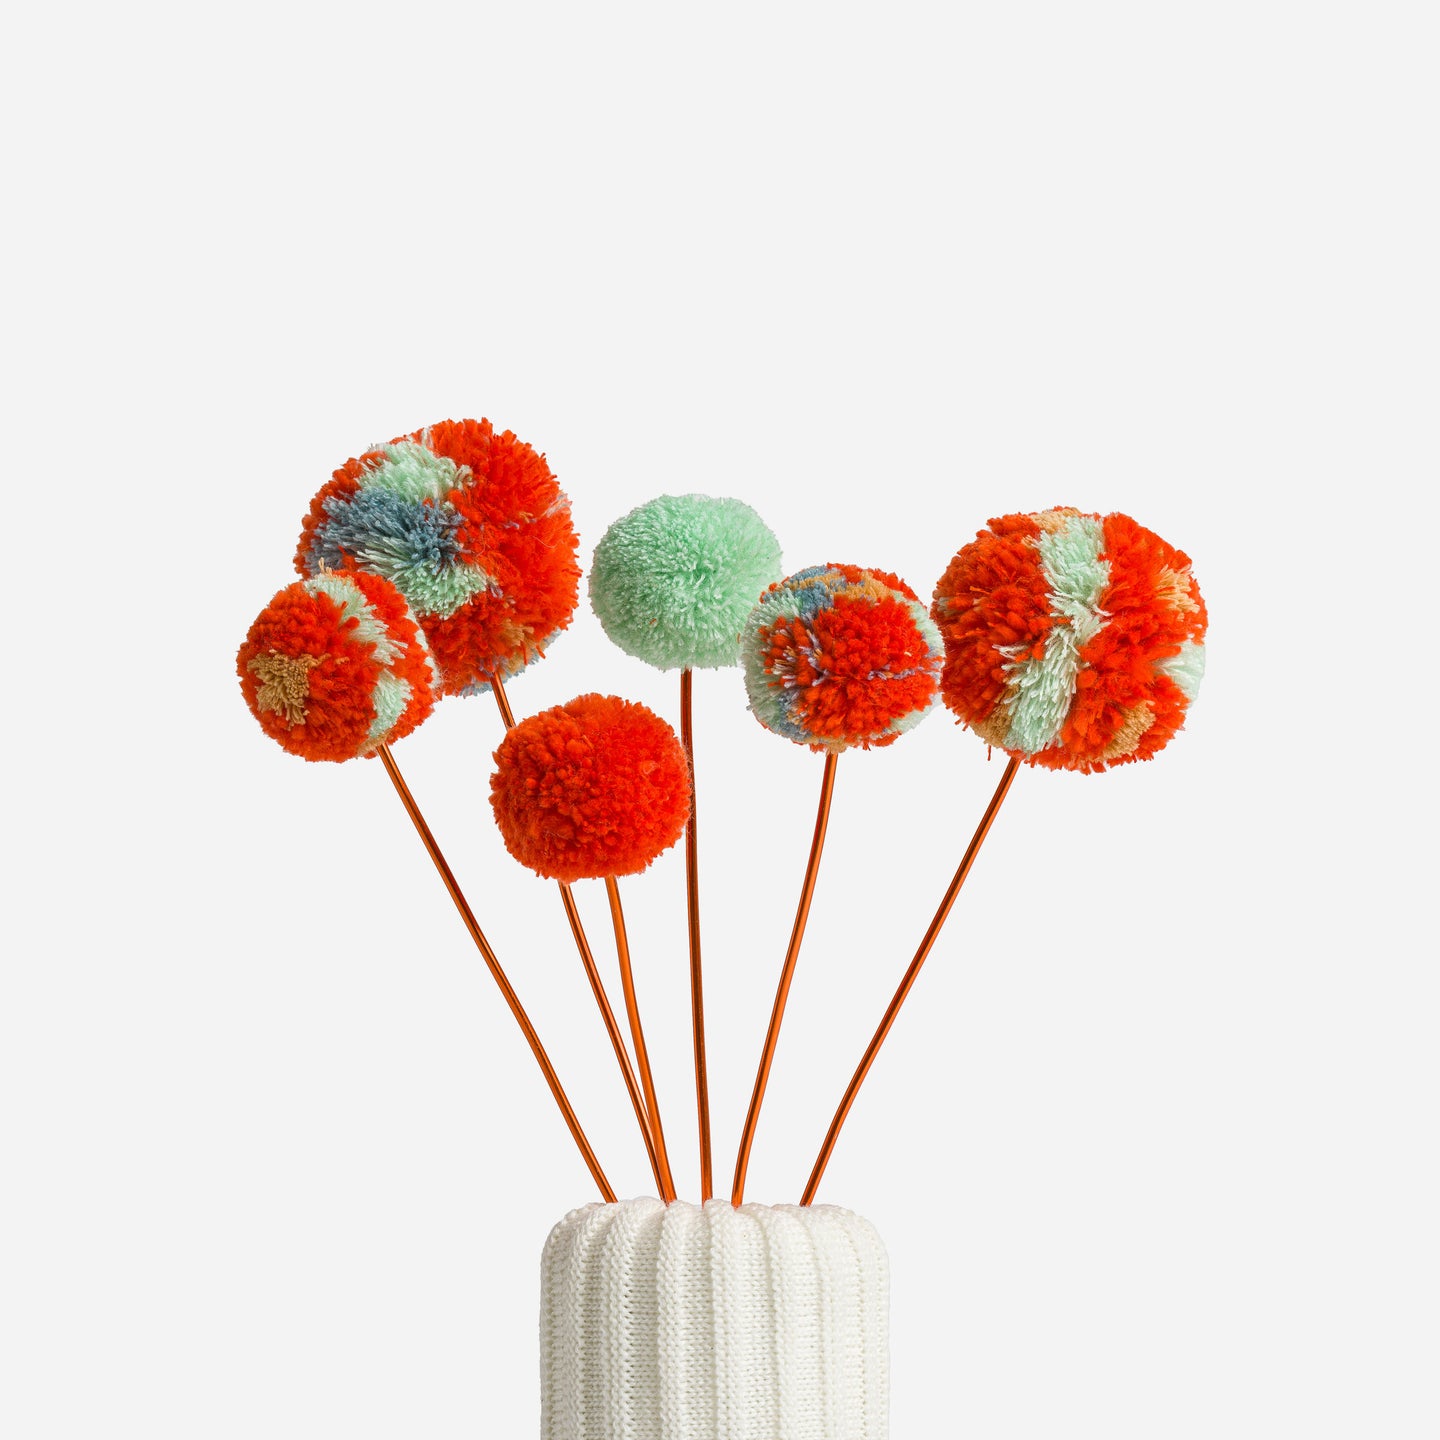 pretty and colorful pom pom flowers in a knitted vase with a white background